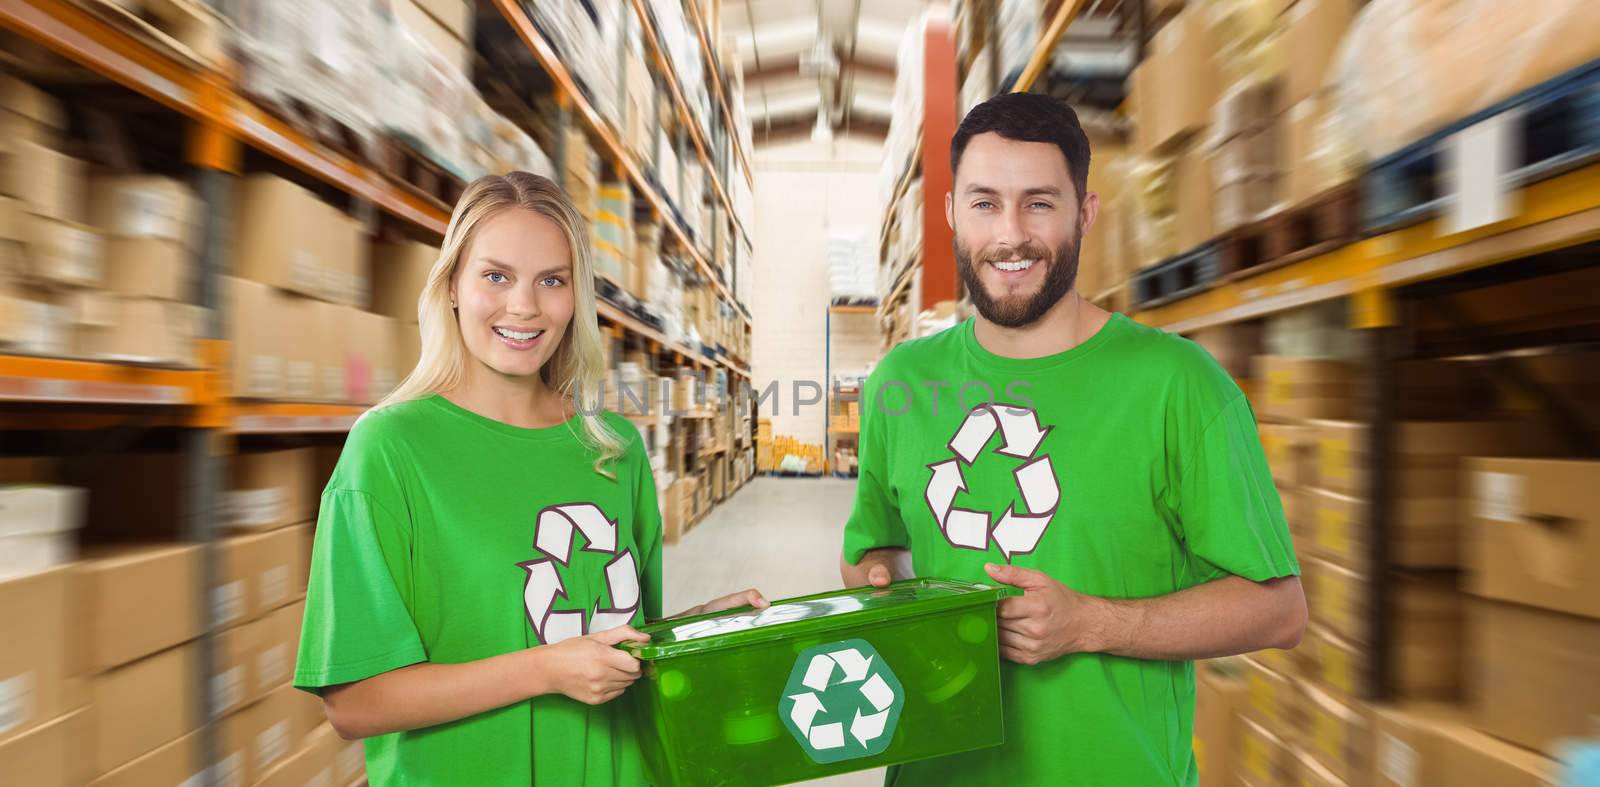 Portrait of smiling volunteers carrying recycling container  against shelves with boxes in warehouse